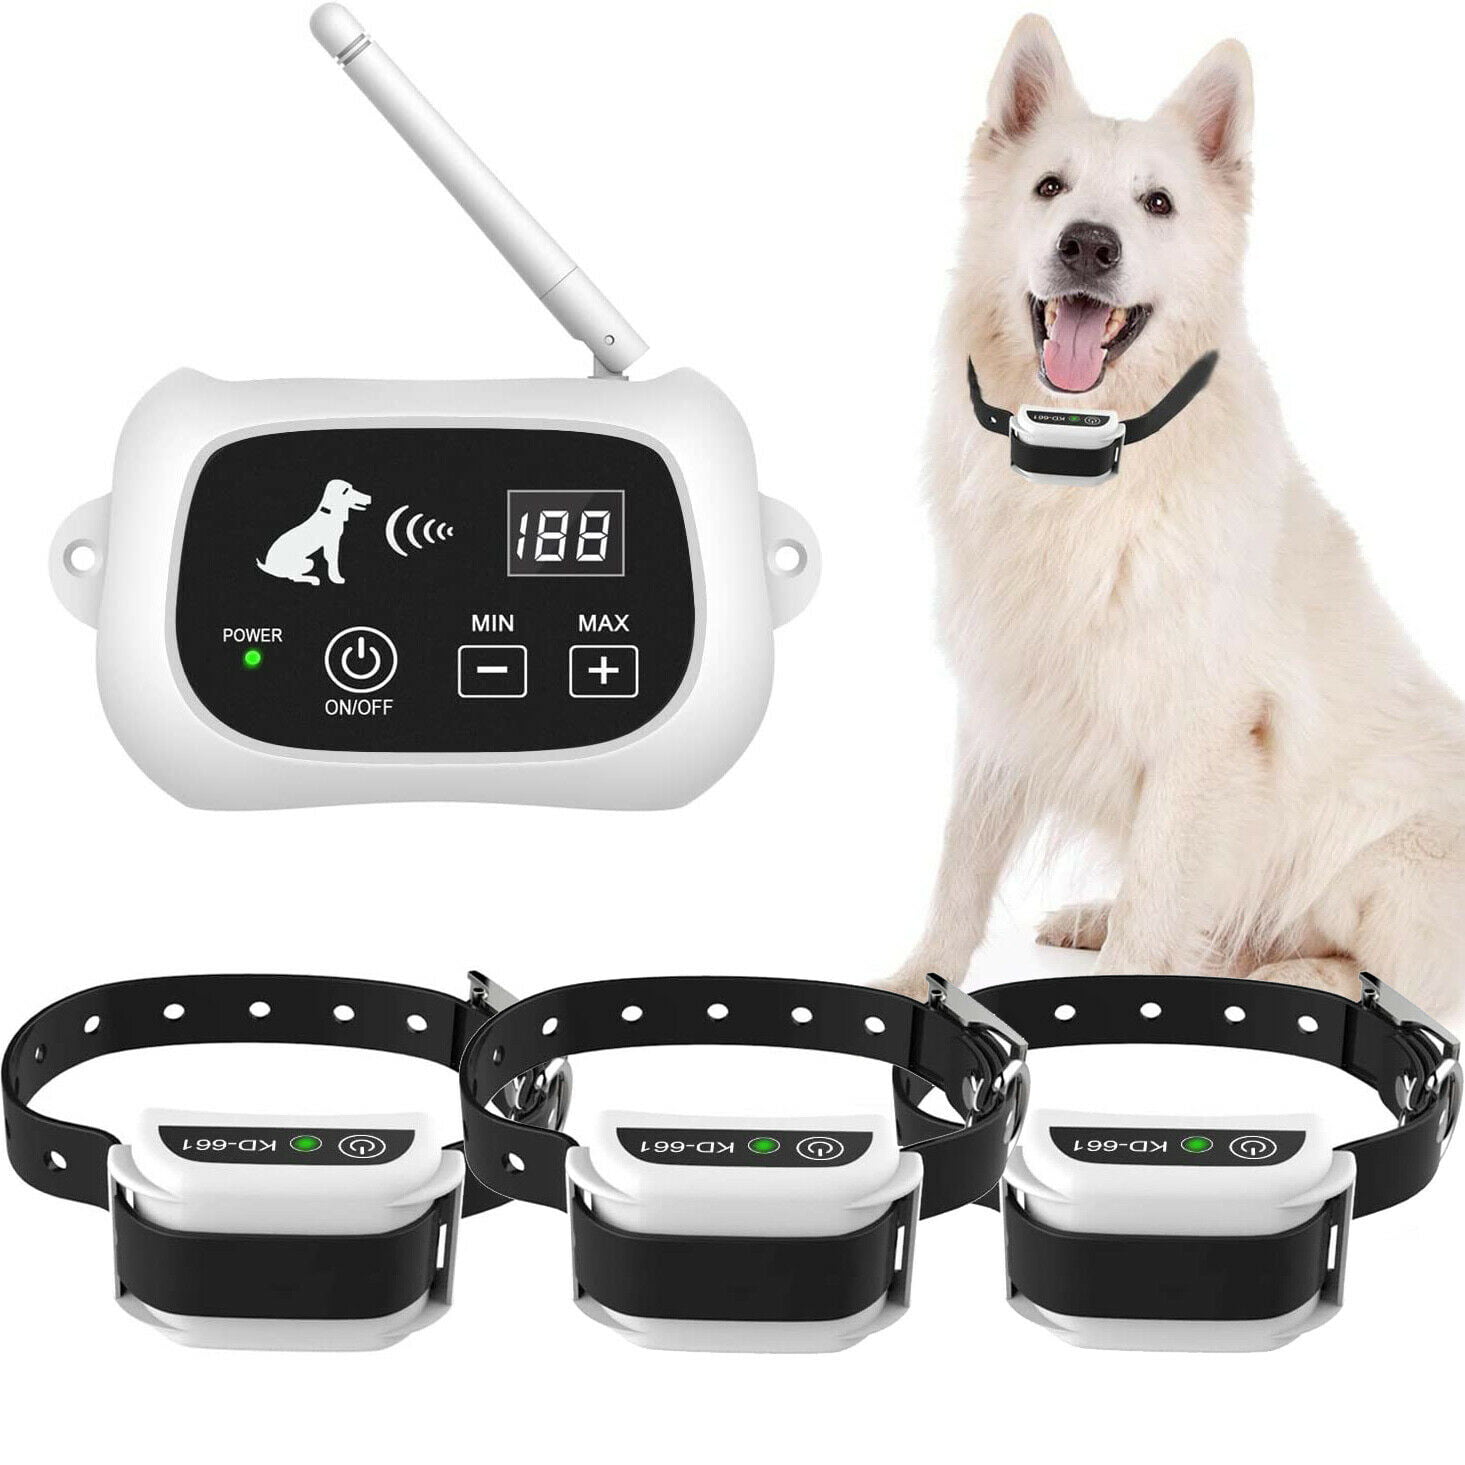 Pet dog Fence system Training Electric shock Dogs Collar Dog accessories 